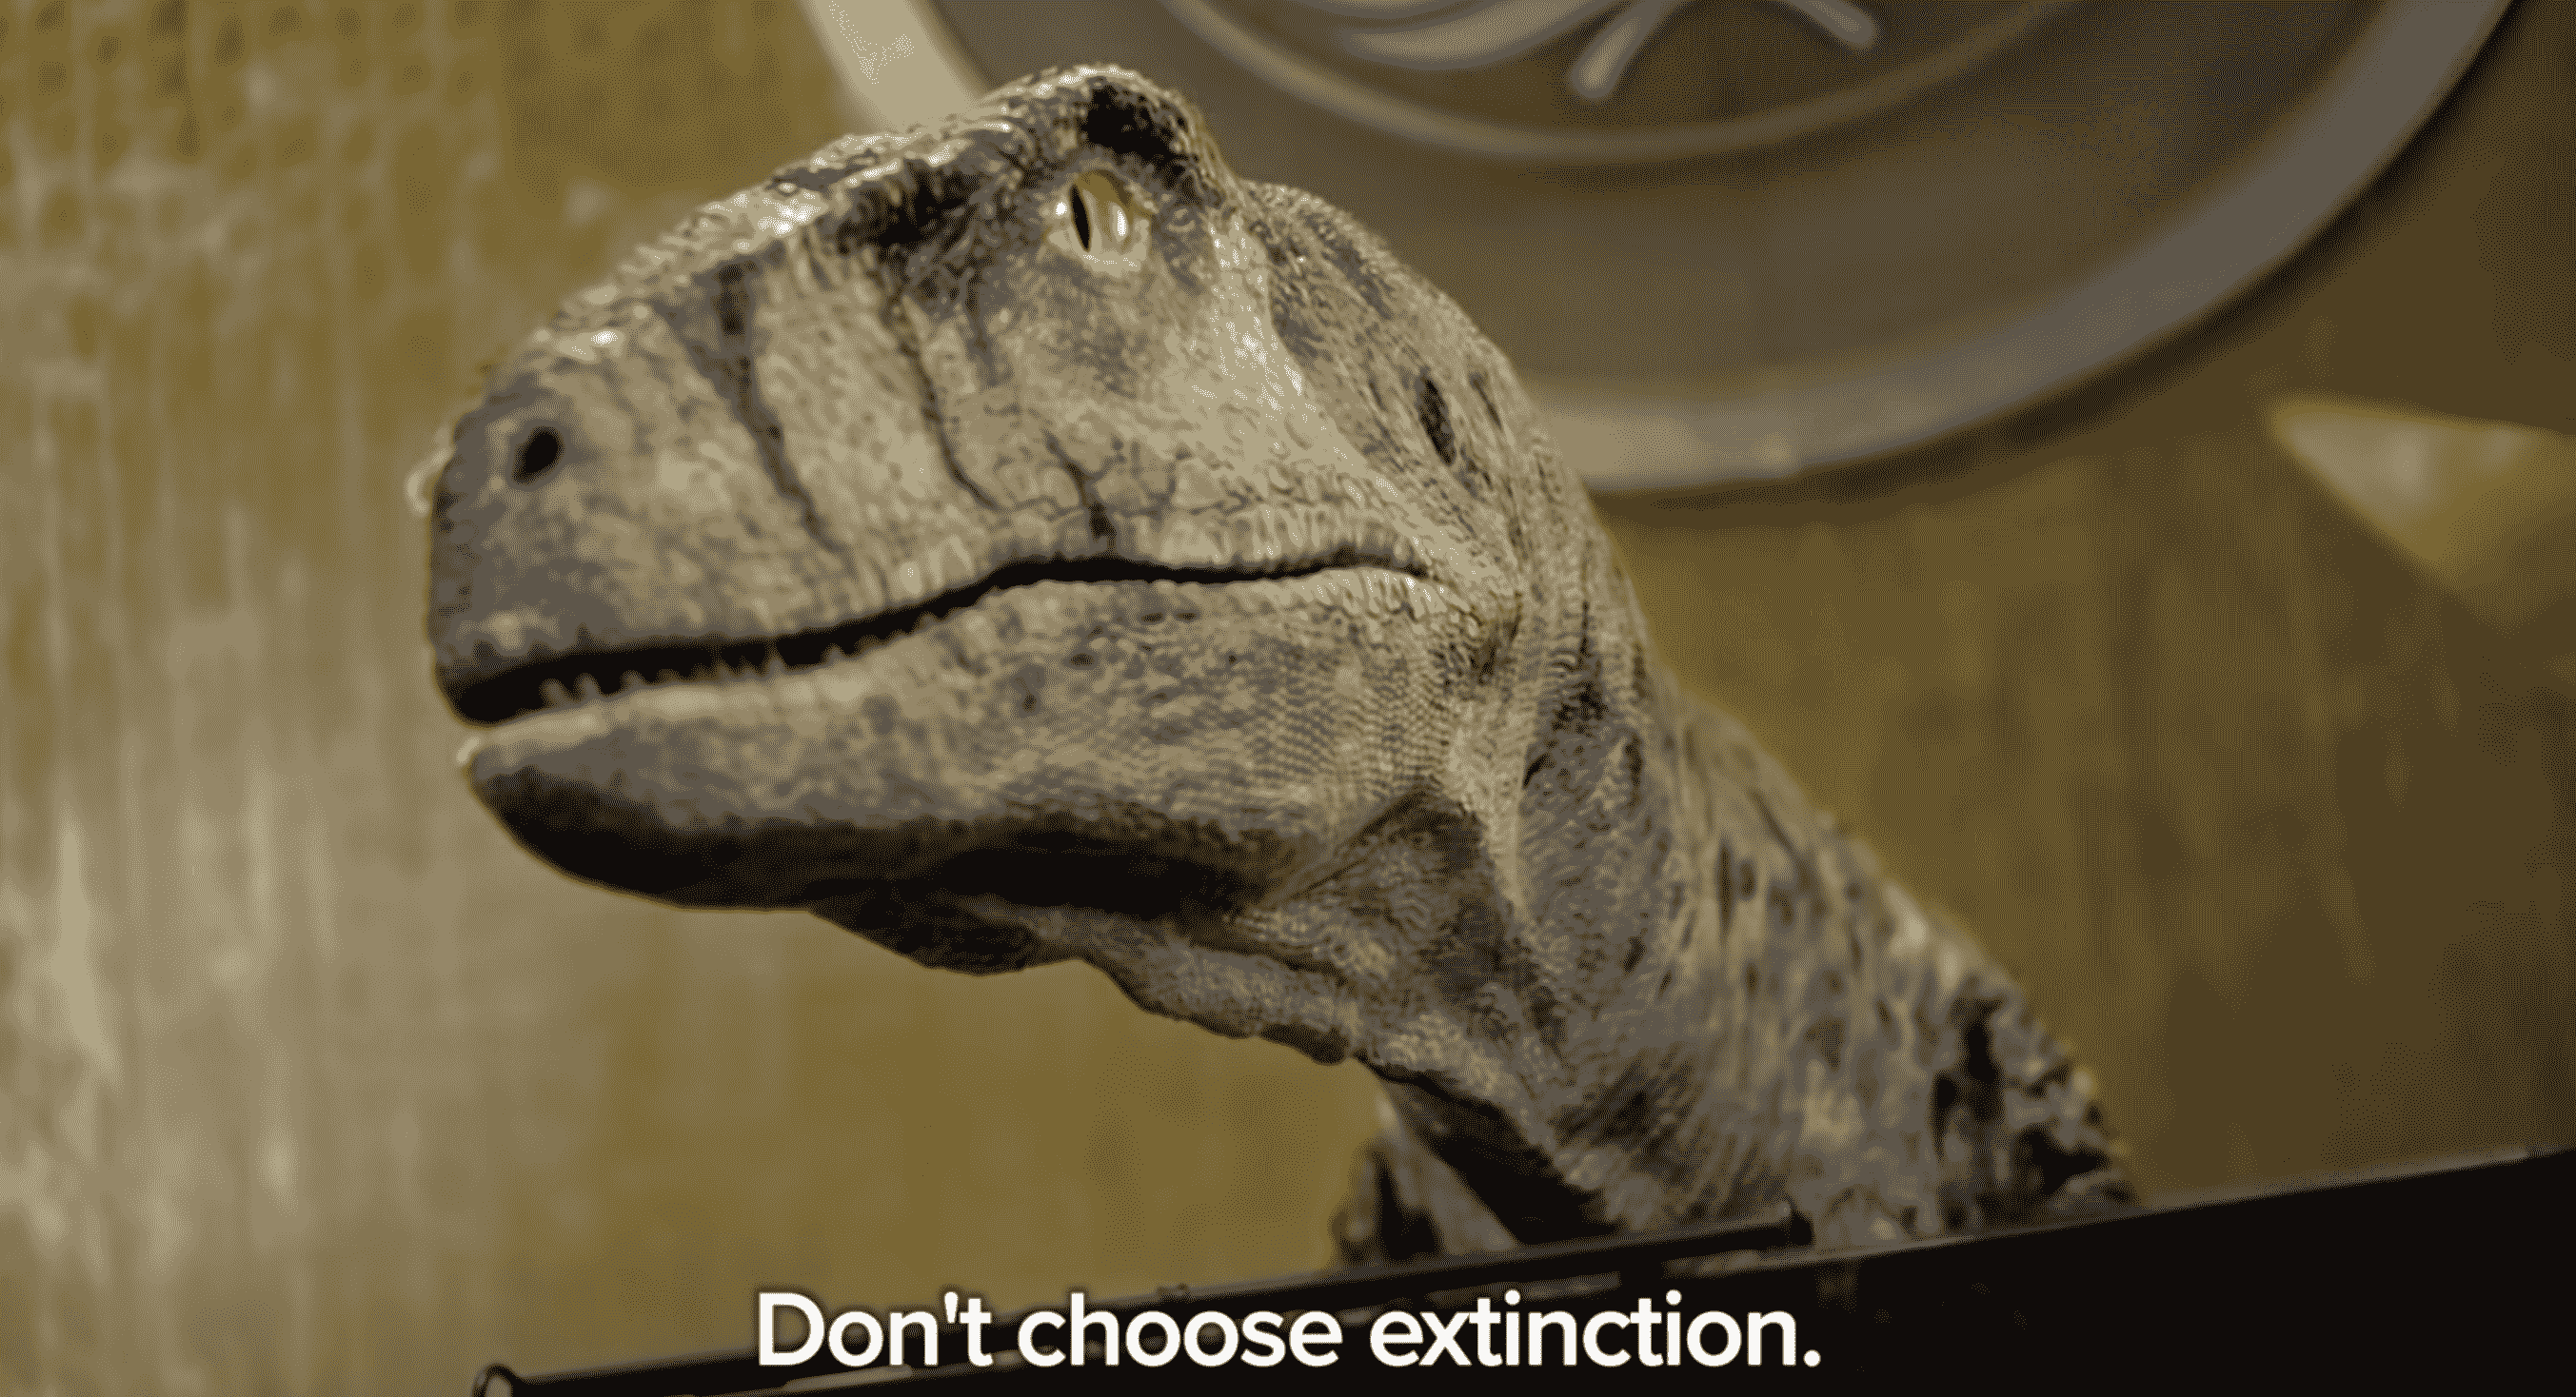 Dinosaur at a lecture telling the UN audience not to choose extinction  